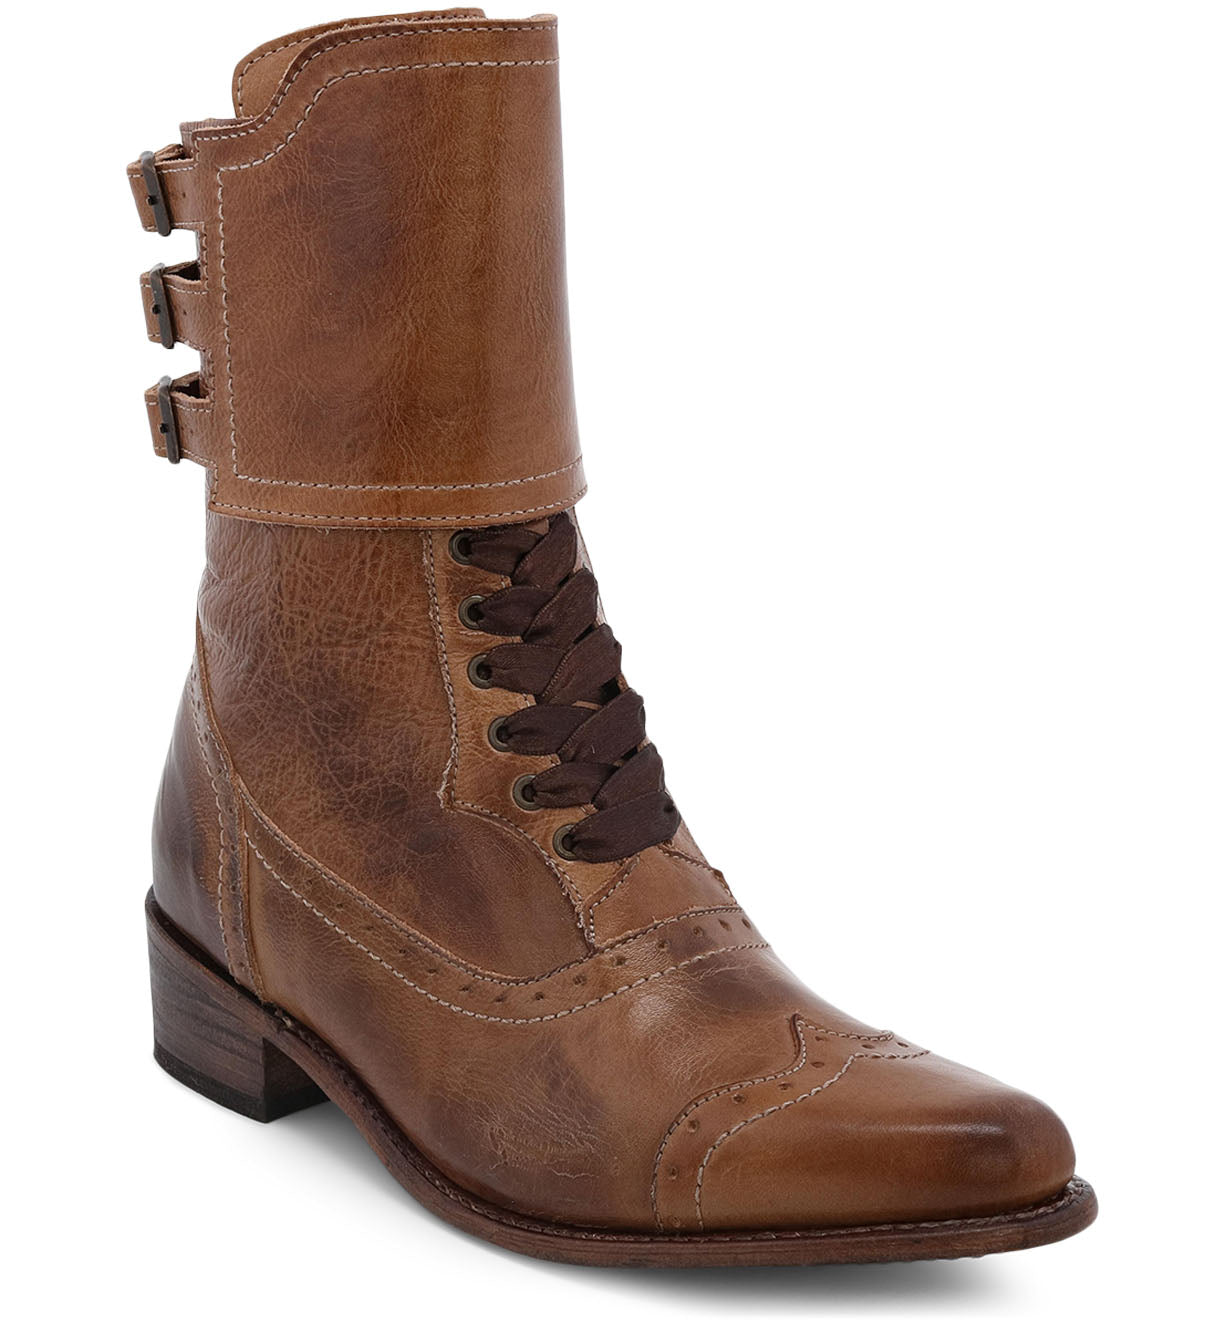 The Oak Tree Farms Faye, a handcrafted leather riding boot with laces, features a sleek tan color.